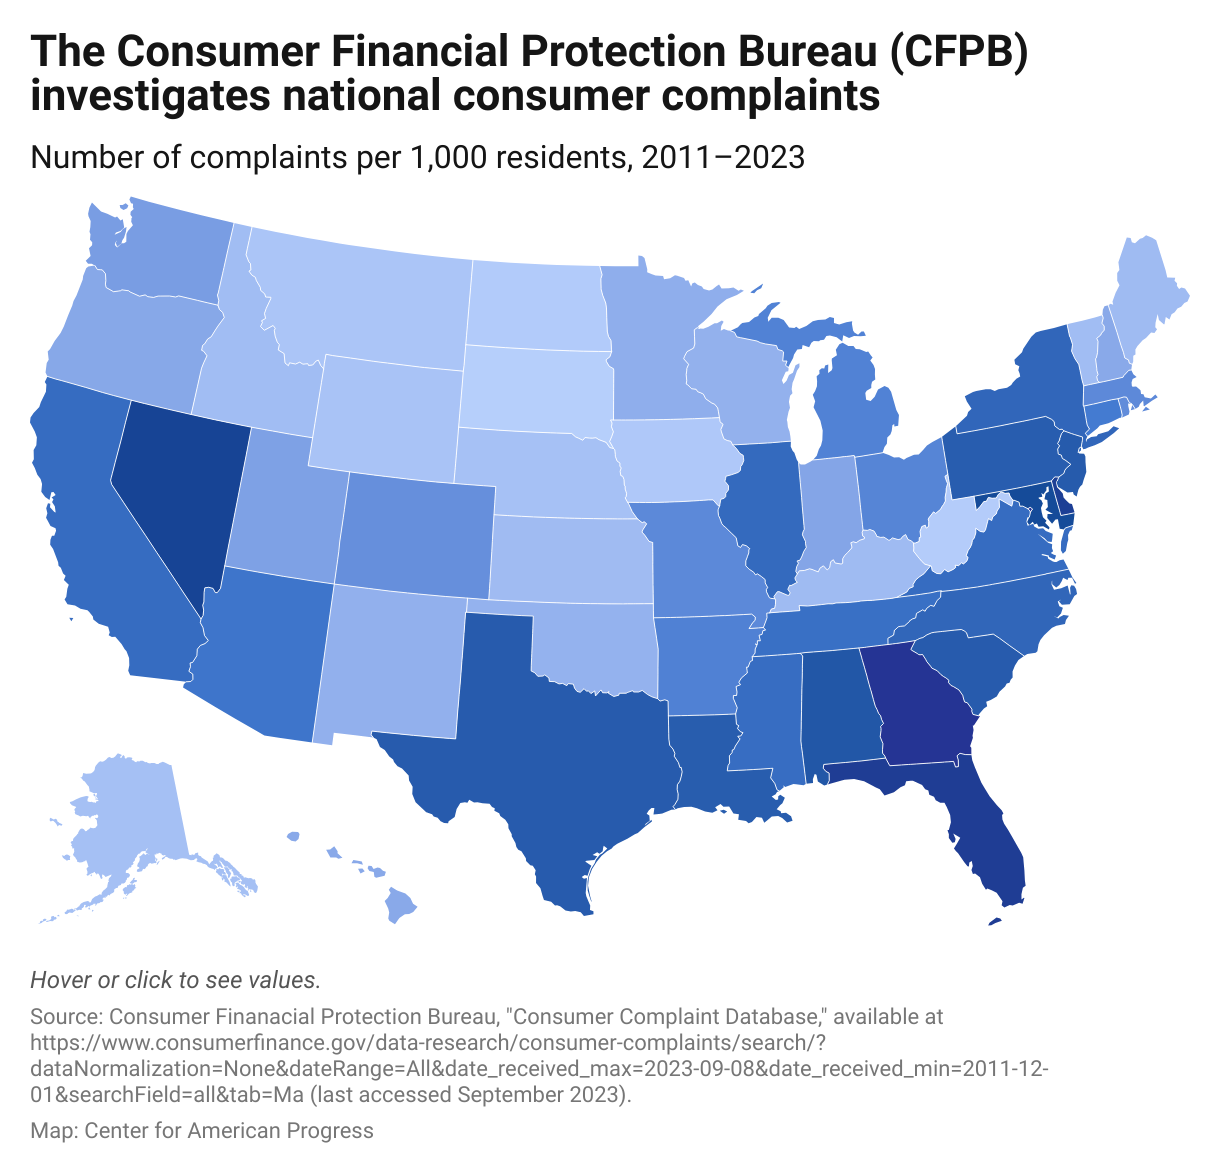 A map of the United States shaded to denote the volume of consumer complaints per 1,000 residents made to the CFPB, where darkly shaded states signify higher complaint volume and lightly shaded states signify lower complaint volume. 